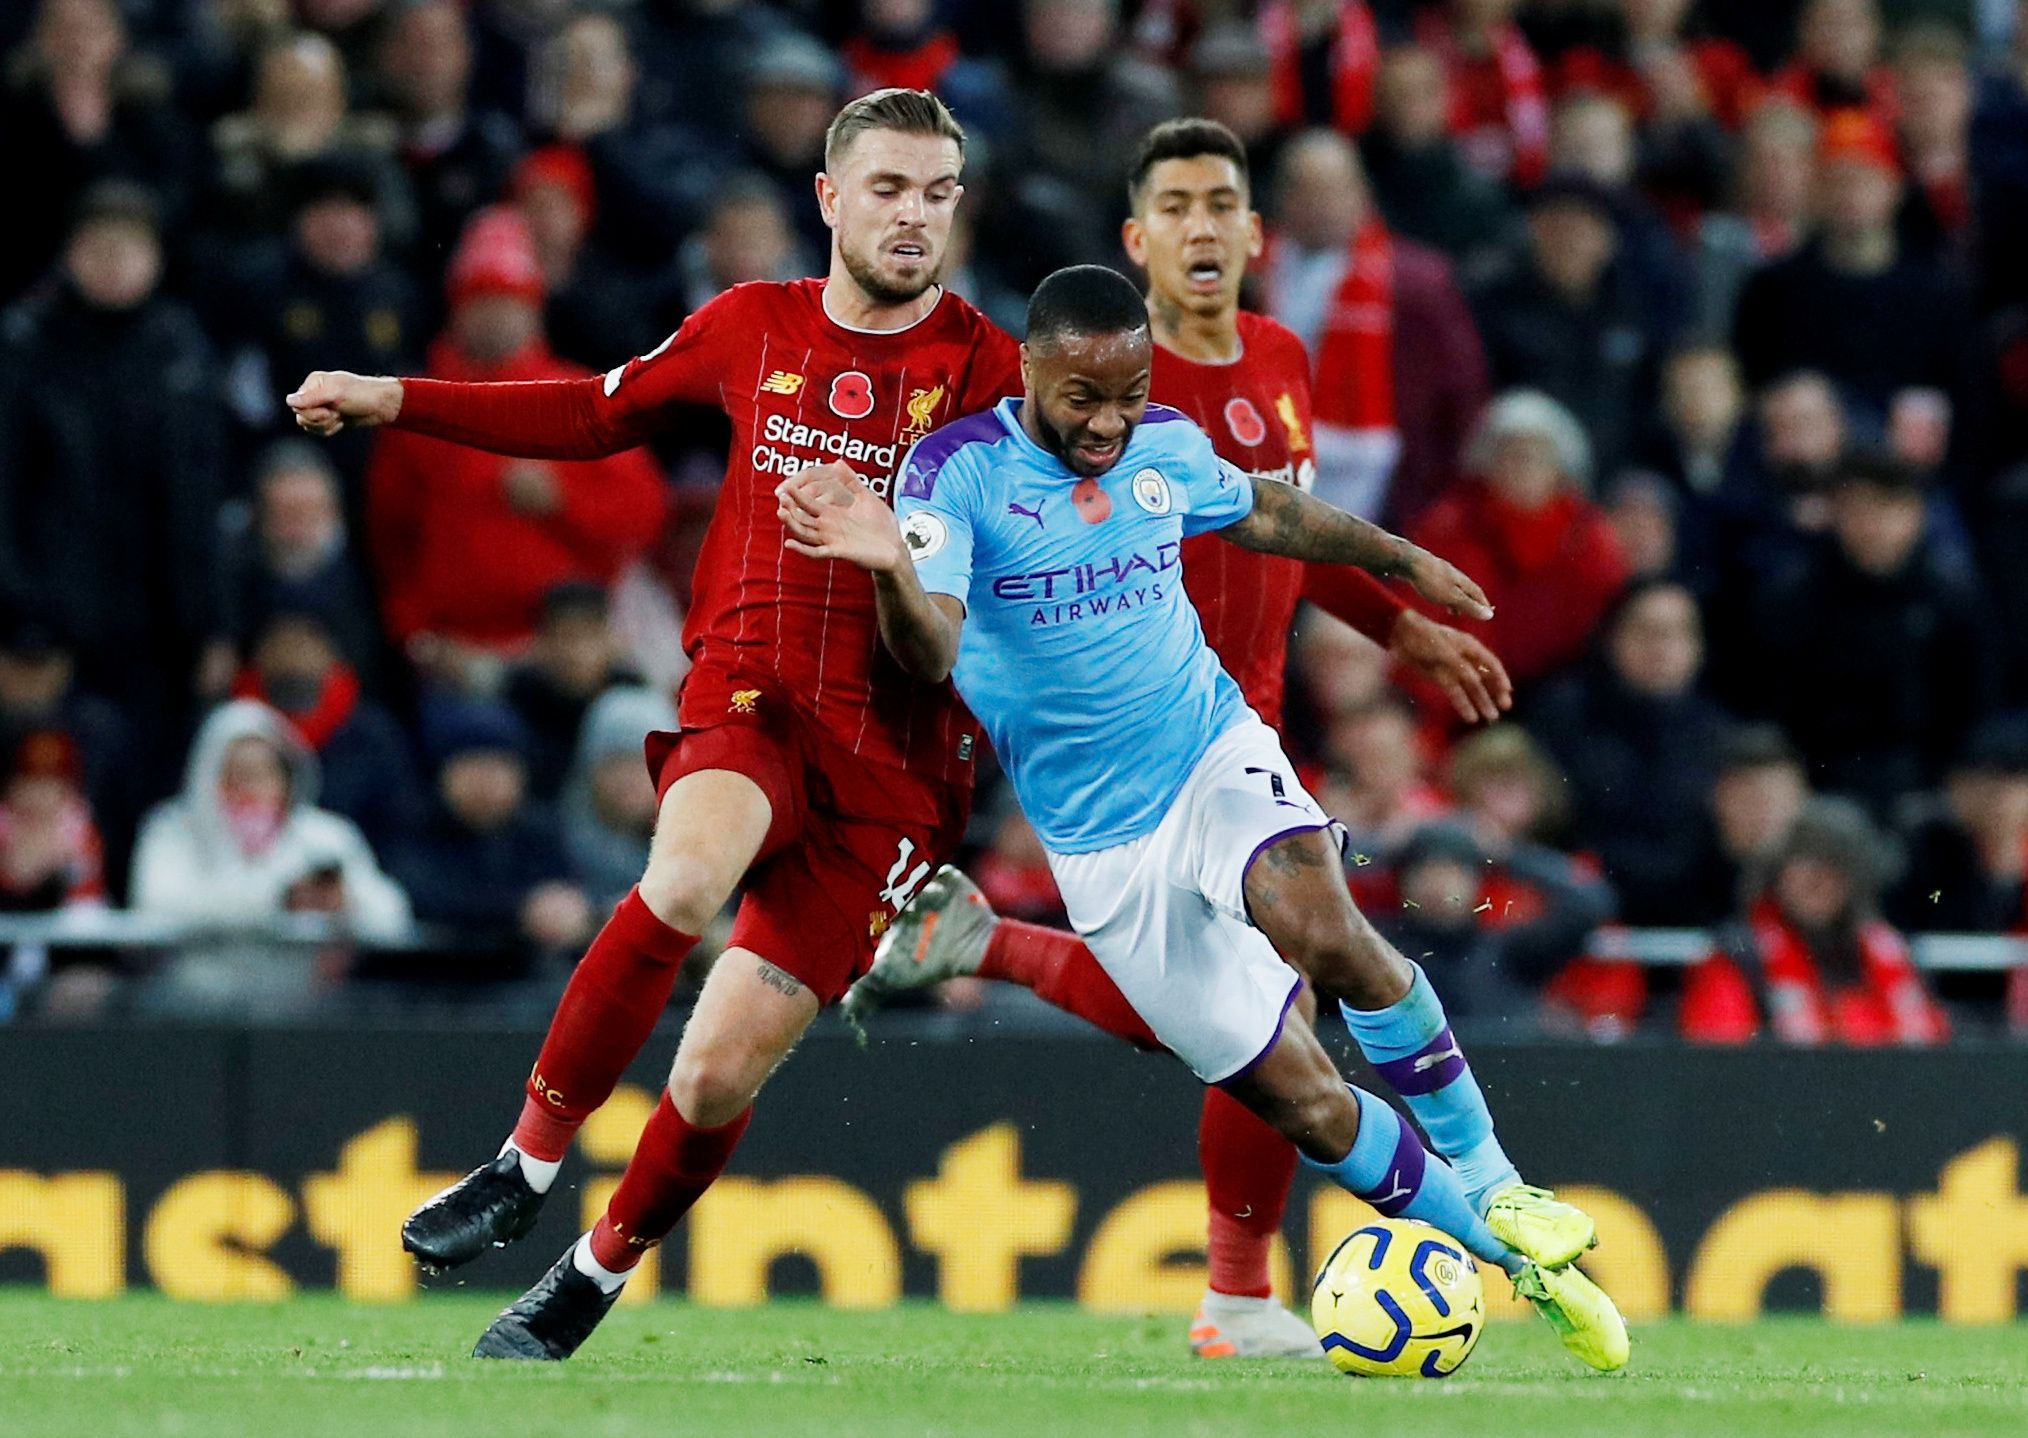 Soccer Football - Premier League - Liverpool v Manchester City - Anfield, Liverpool, Britain - November 10, 2019  Manchester City's Raheem Sterling in action with Liverpool's Jordan Henderson   REUTERS/Phil Noble  EDITORIAL USE ONLY. No use with unauthorized audio, video, data, fixture lists, club/league logos or 